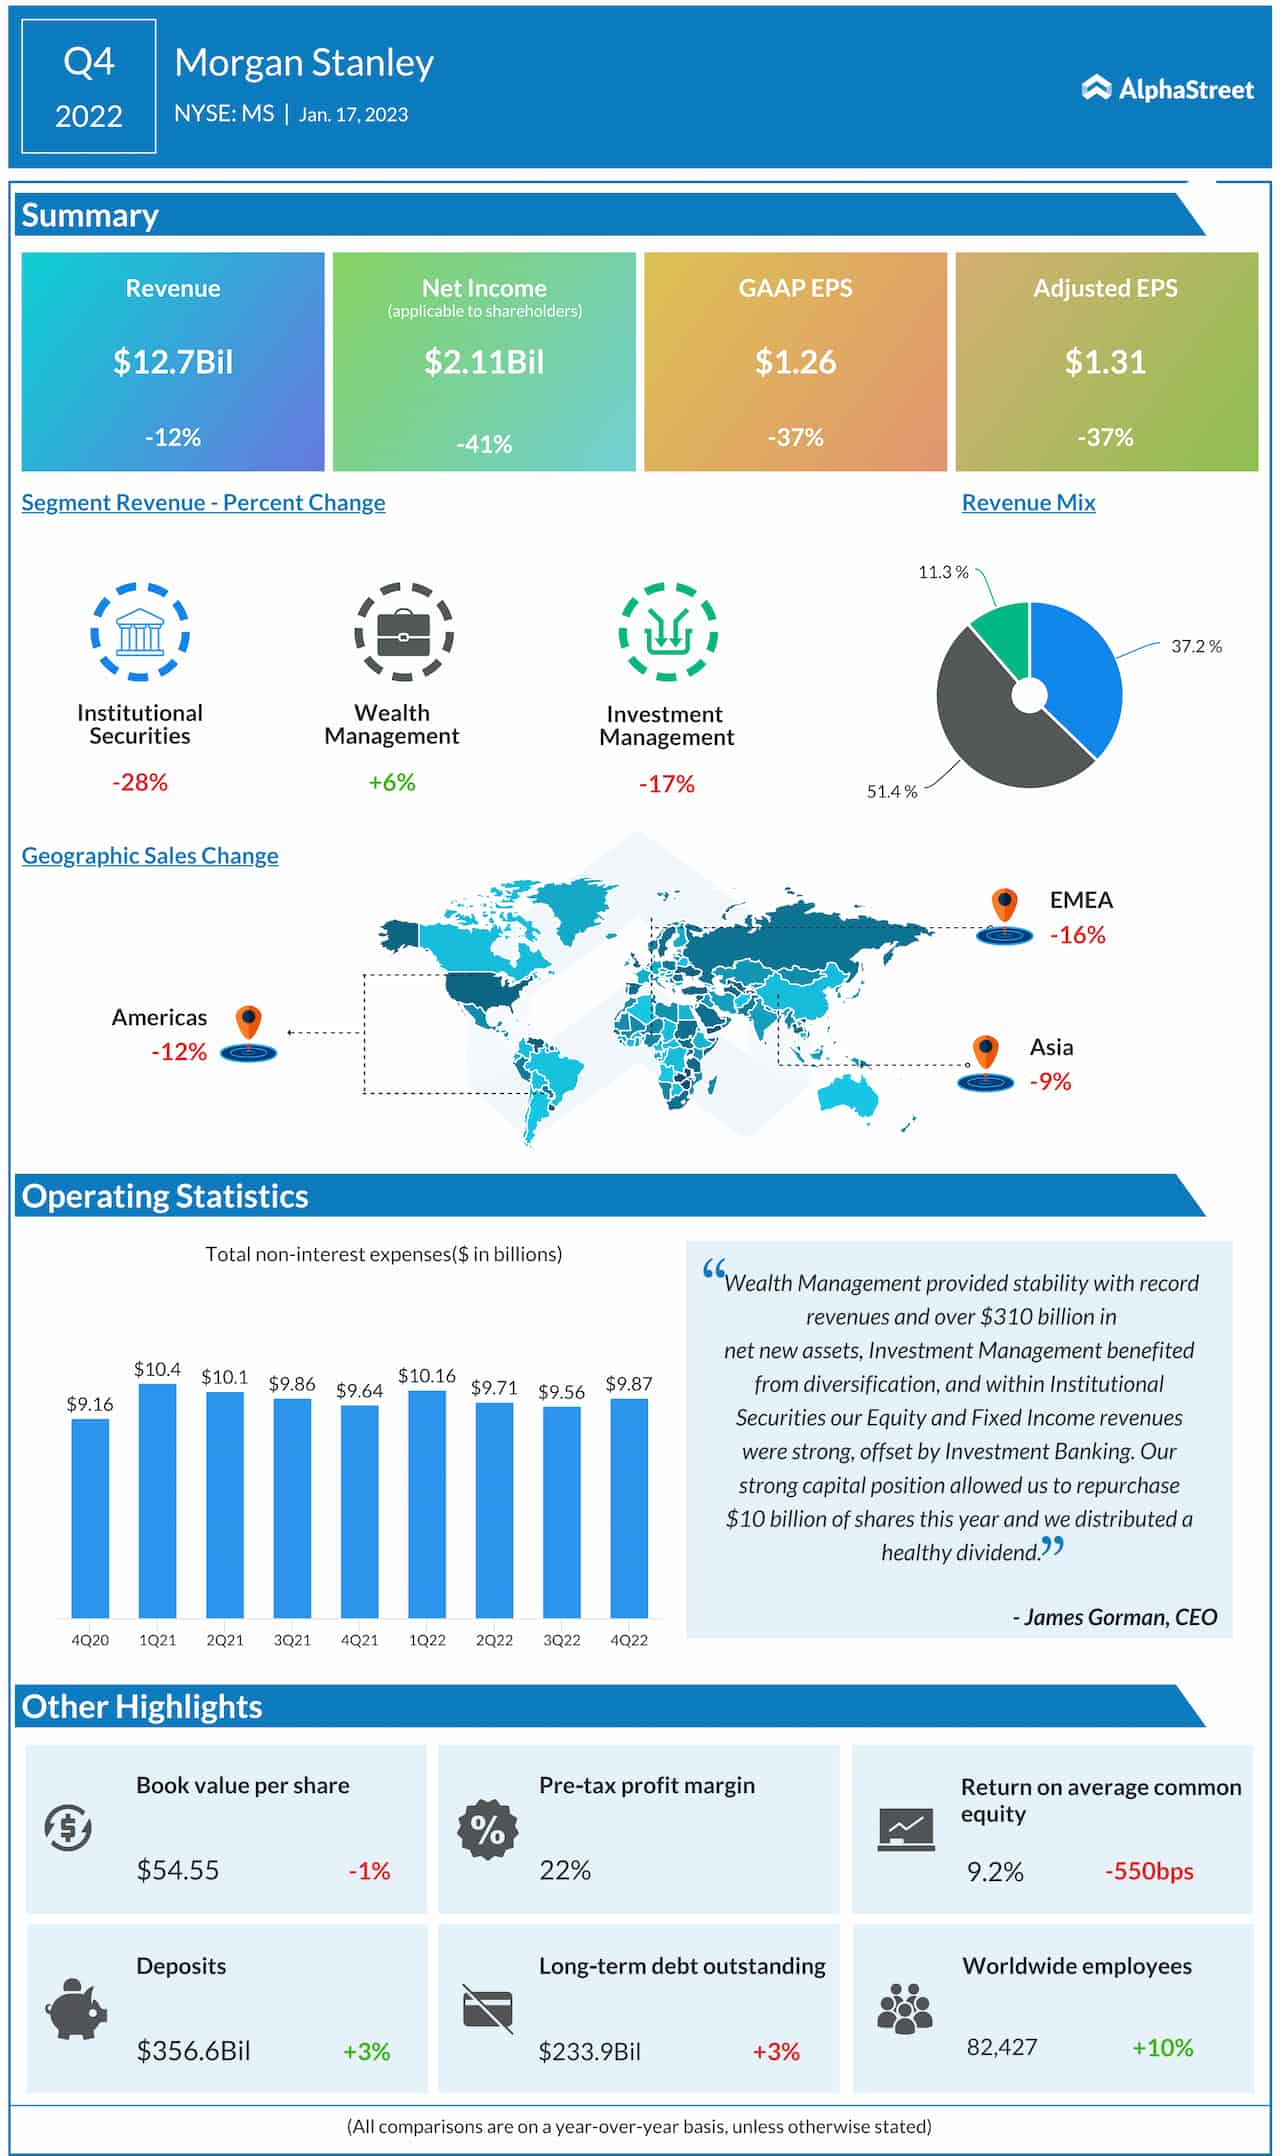 Infographic: Highlights of Morgan Stanley (MS) Q4 2022 earnings report